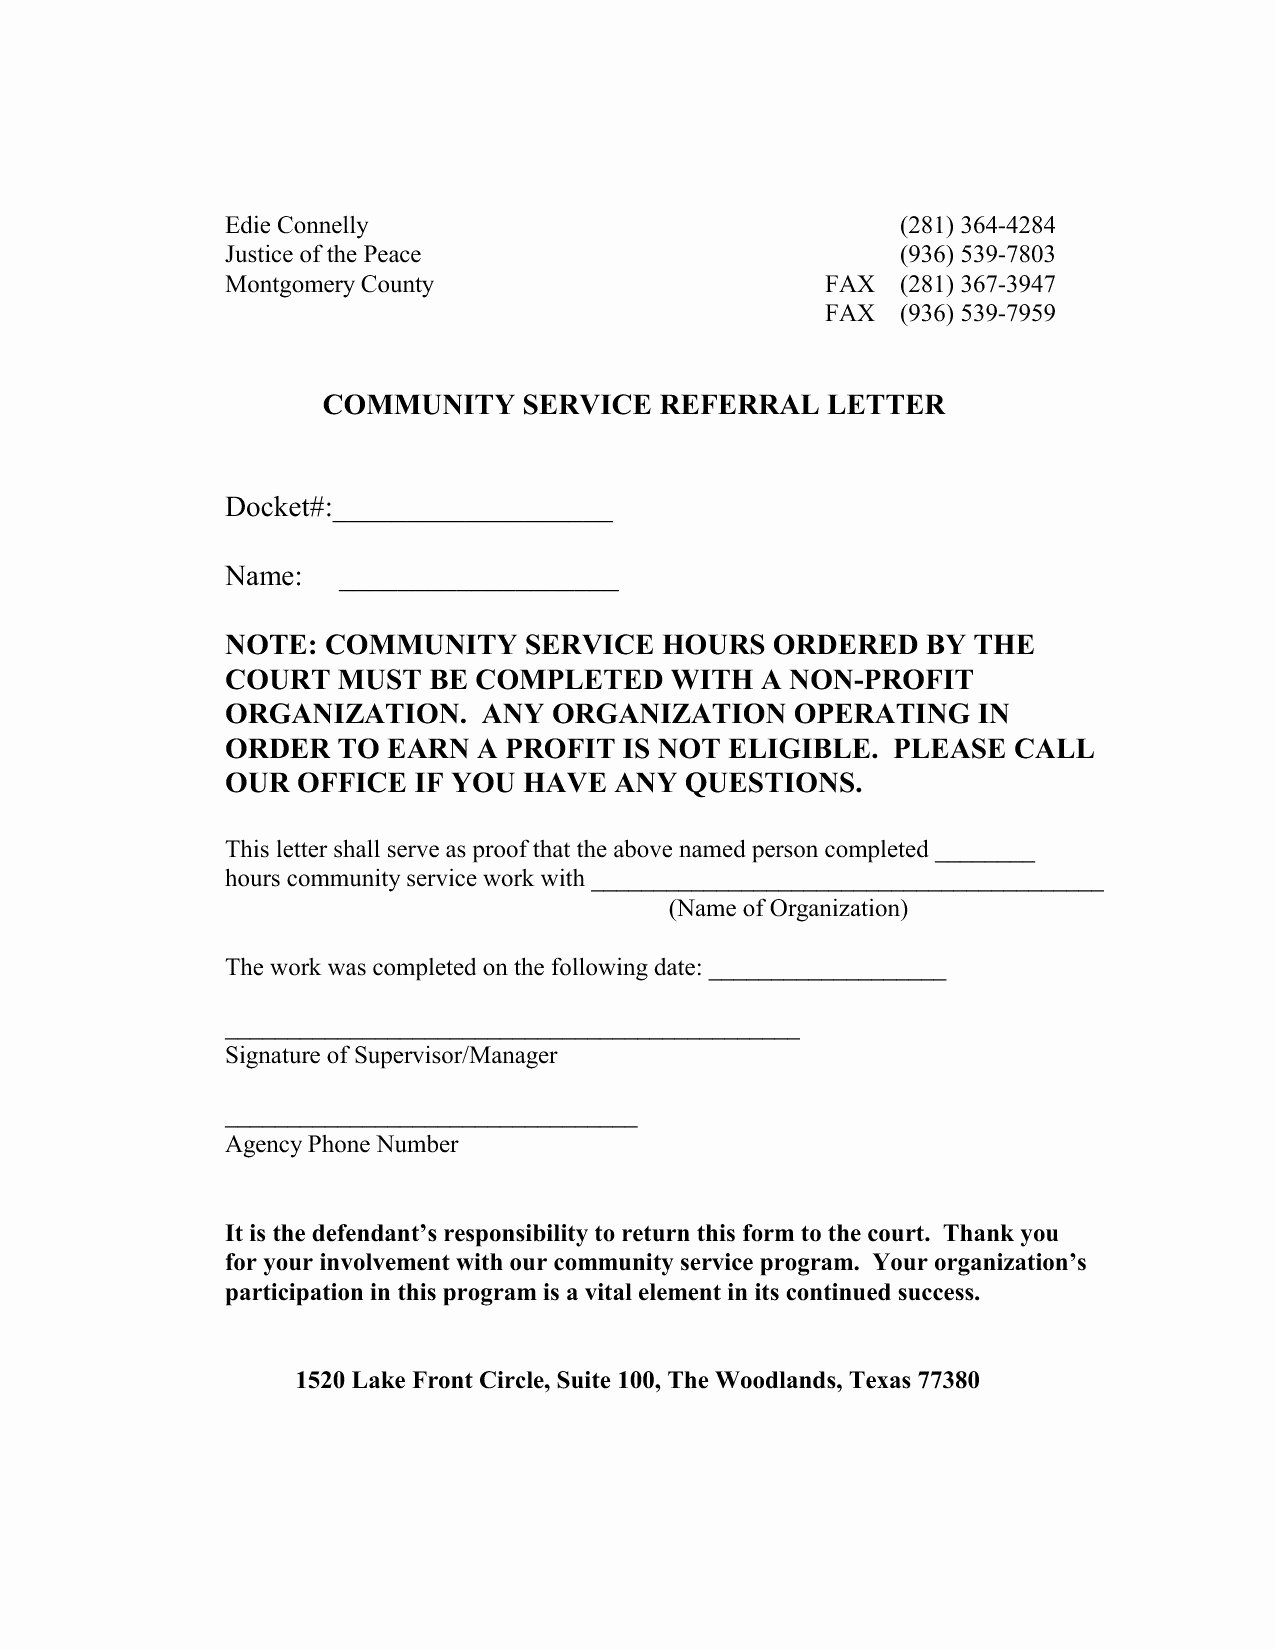 Community Service Certificate Template Best Of Court ordered Munity Service Letter Template Samples